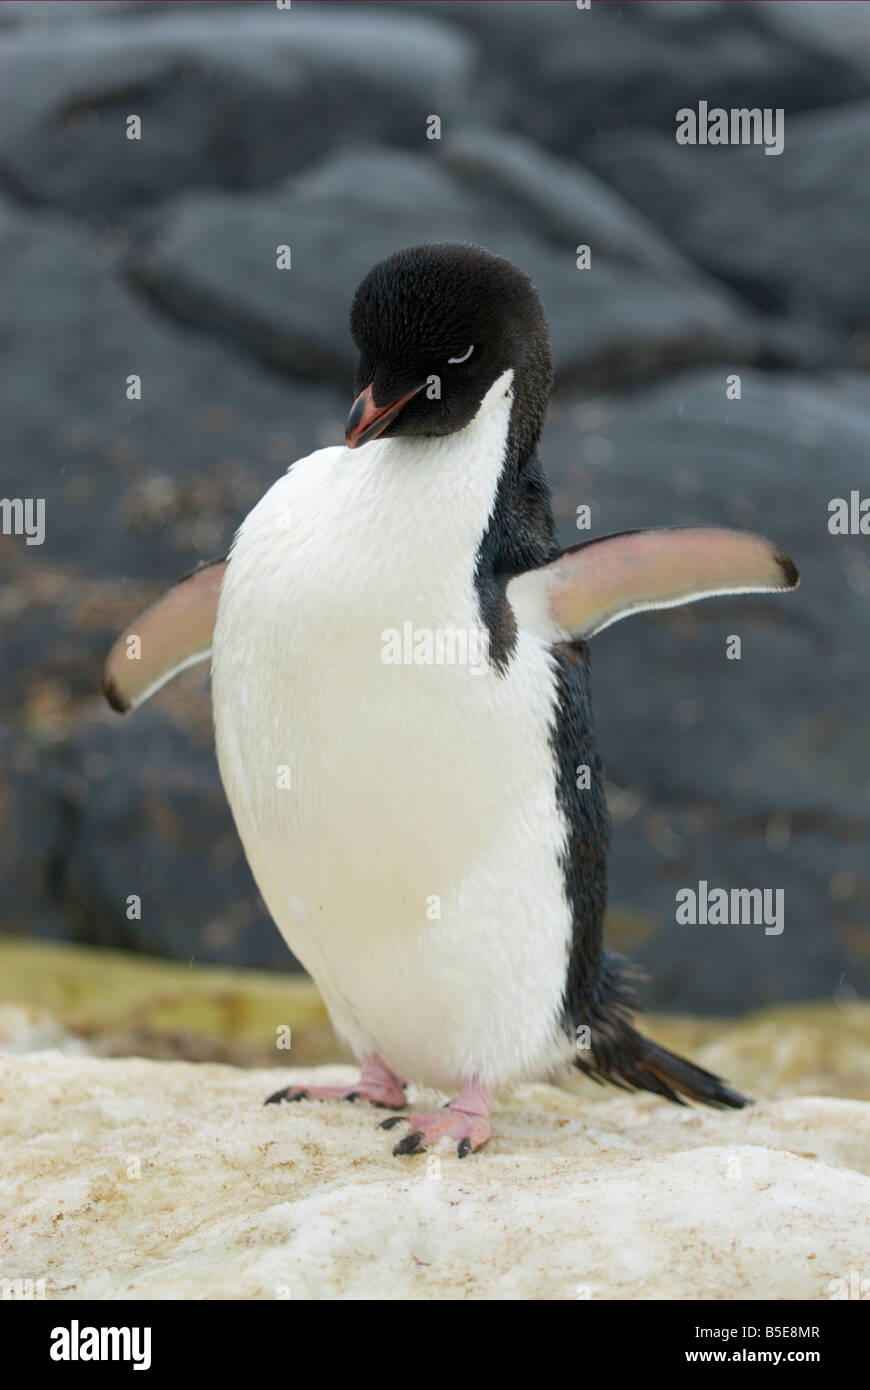 Adelie penguin with spreaded wings Stock Photo